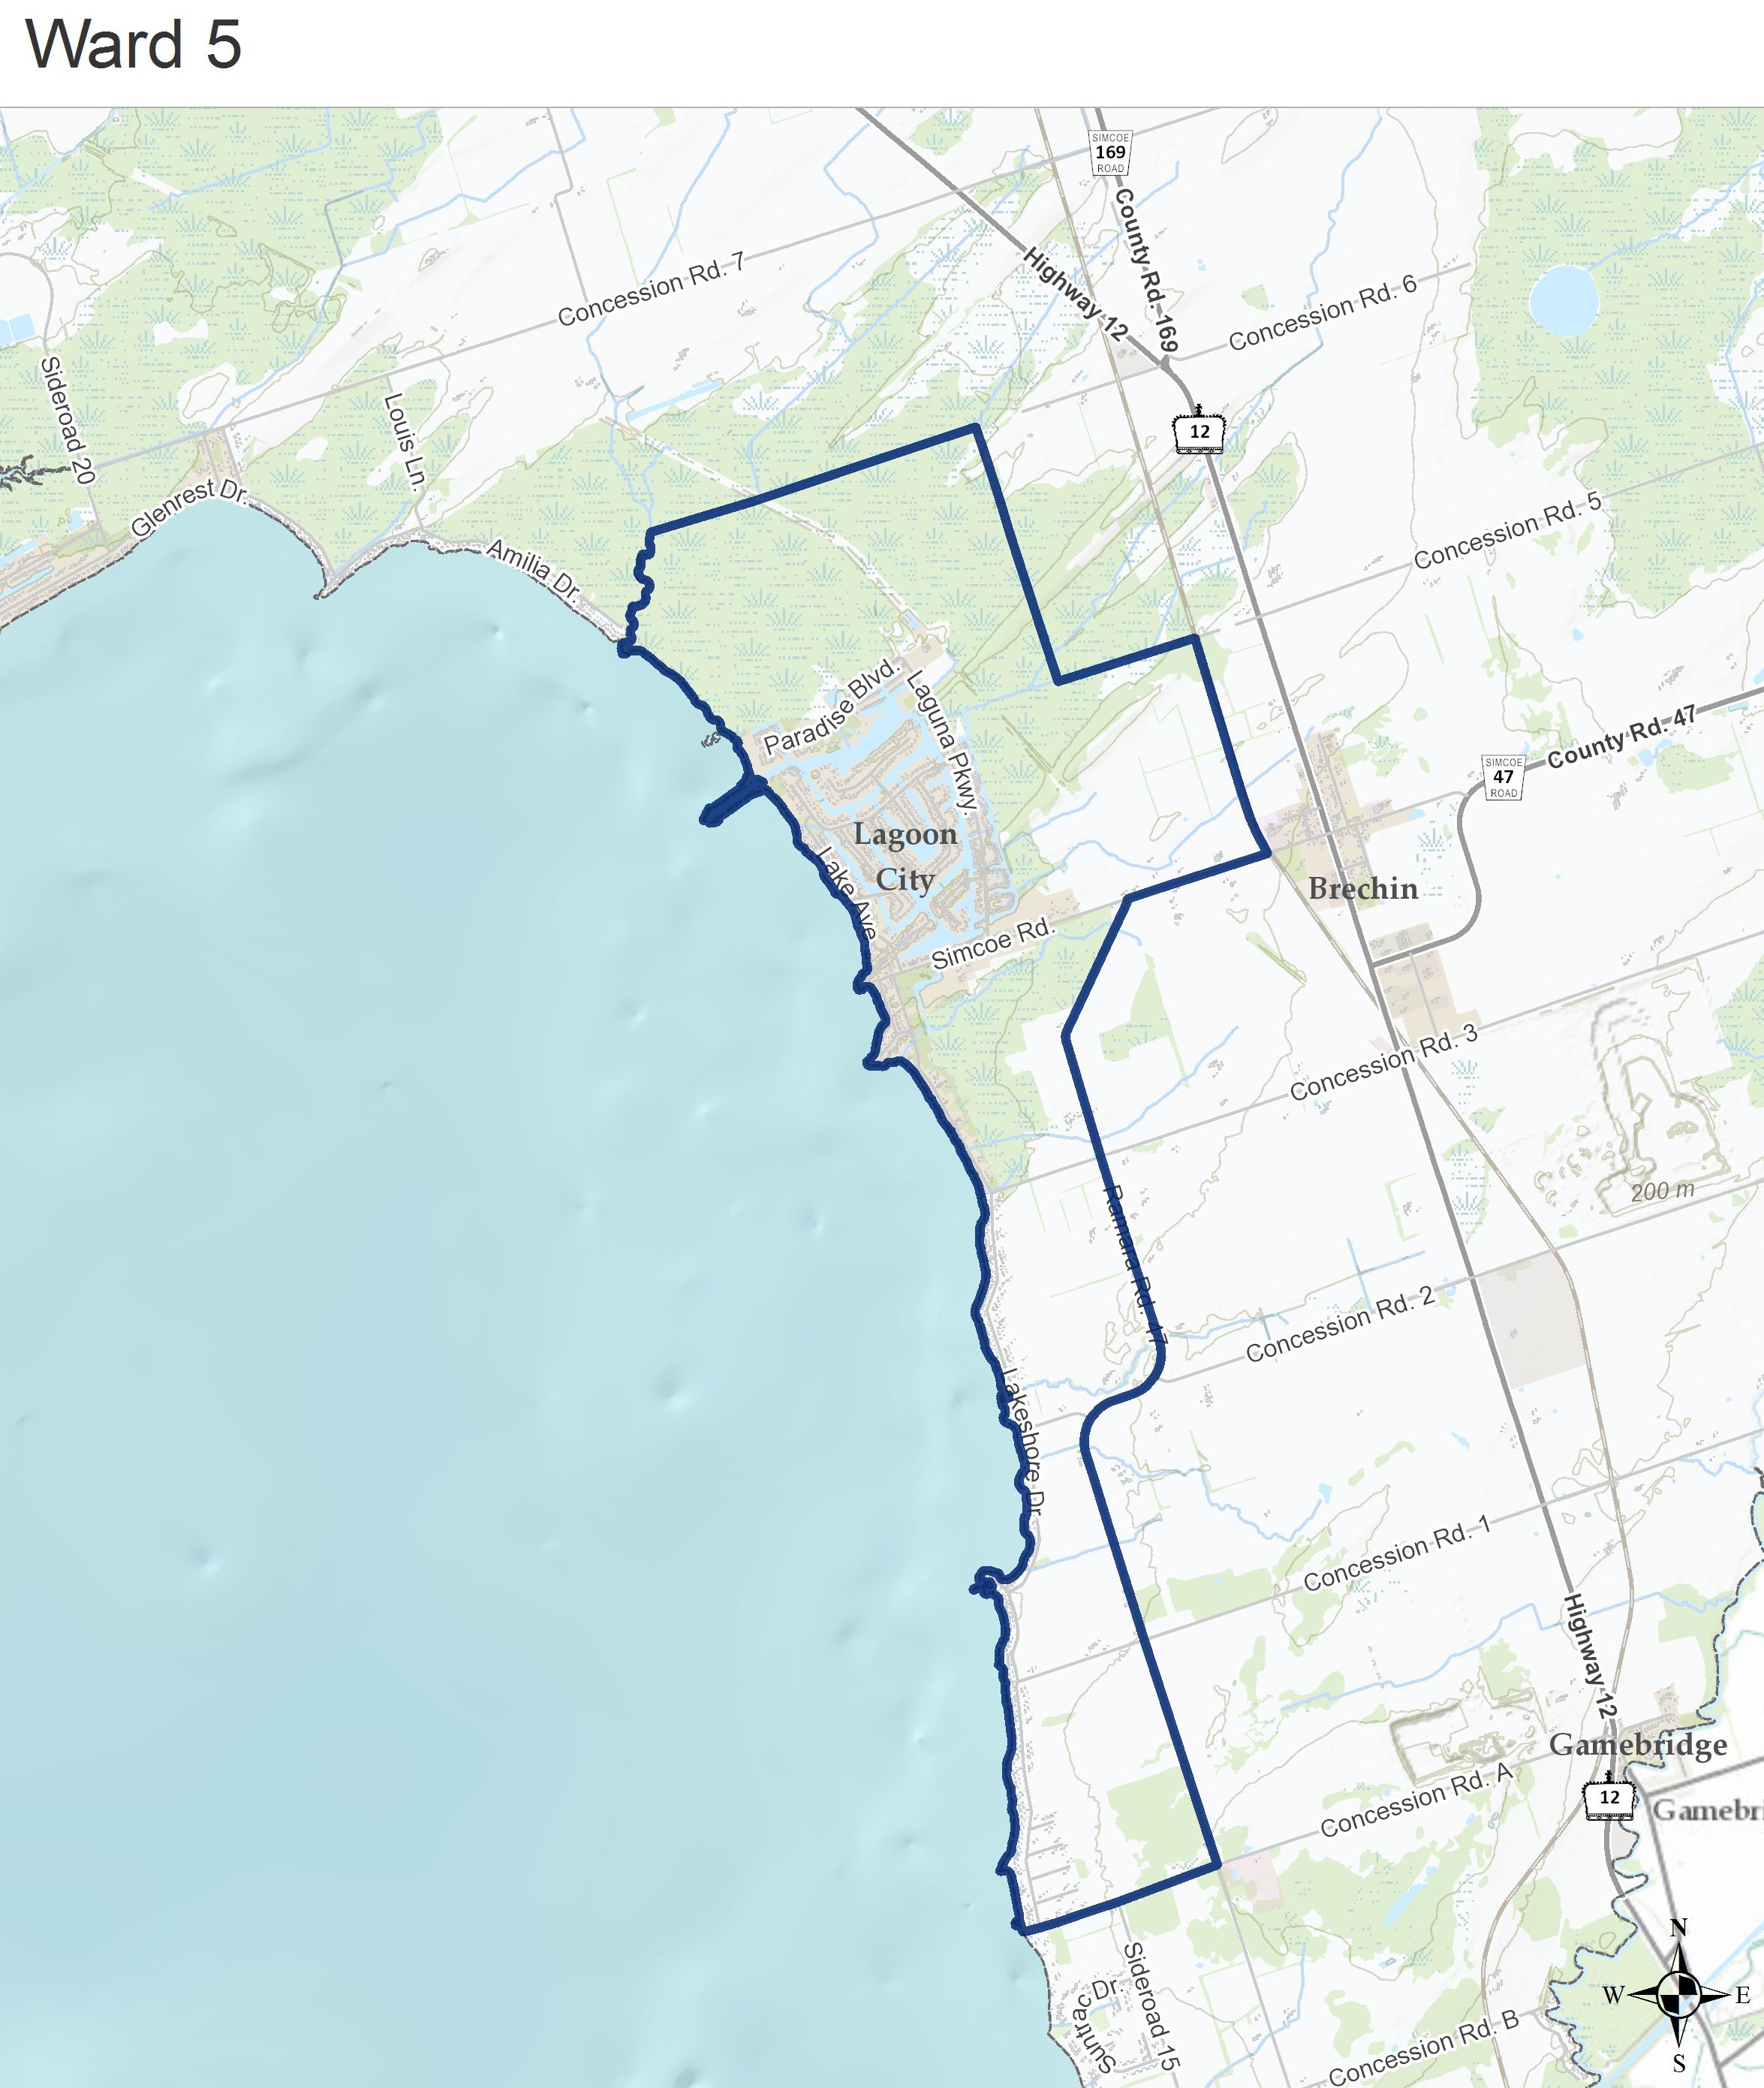 Map showing the area of Ward 5